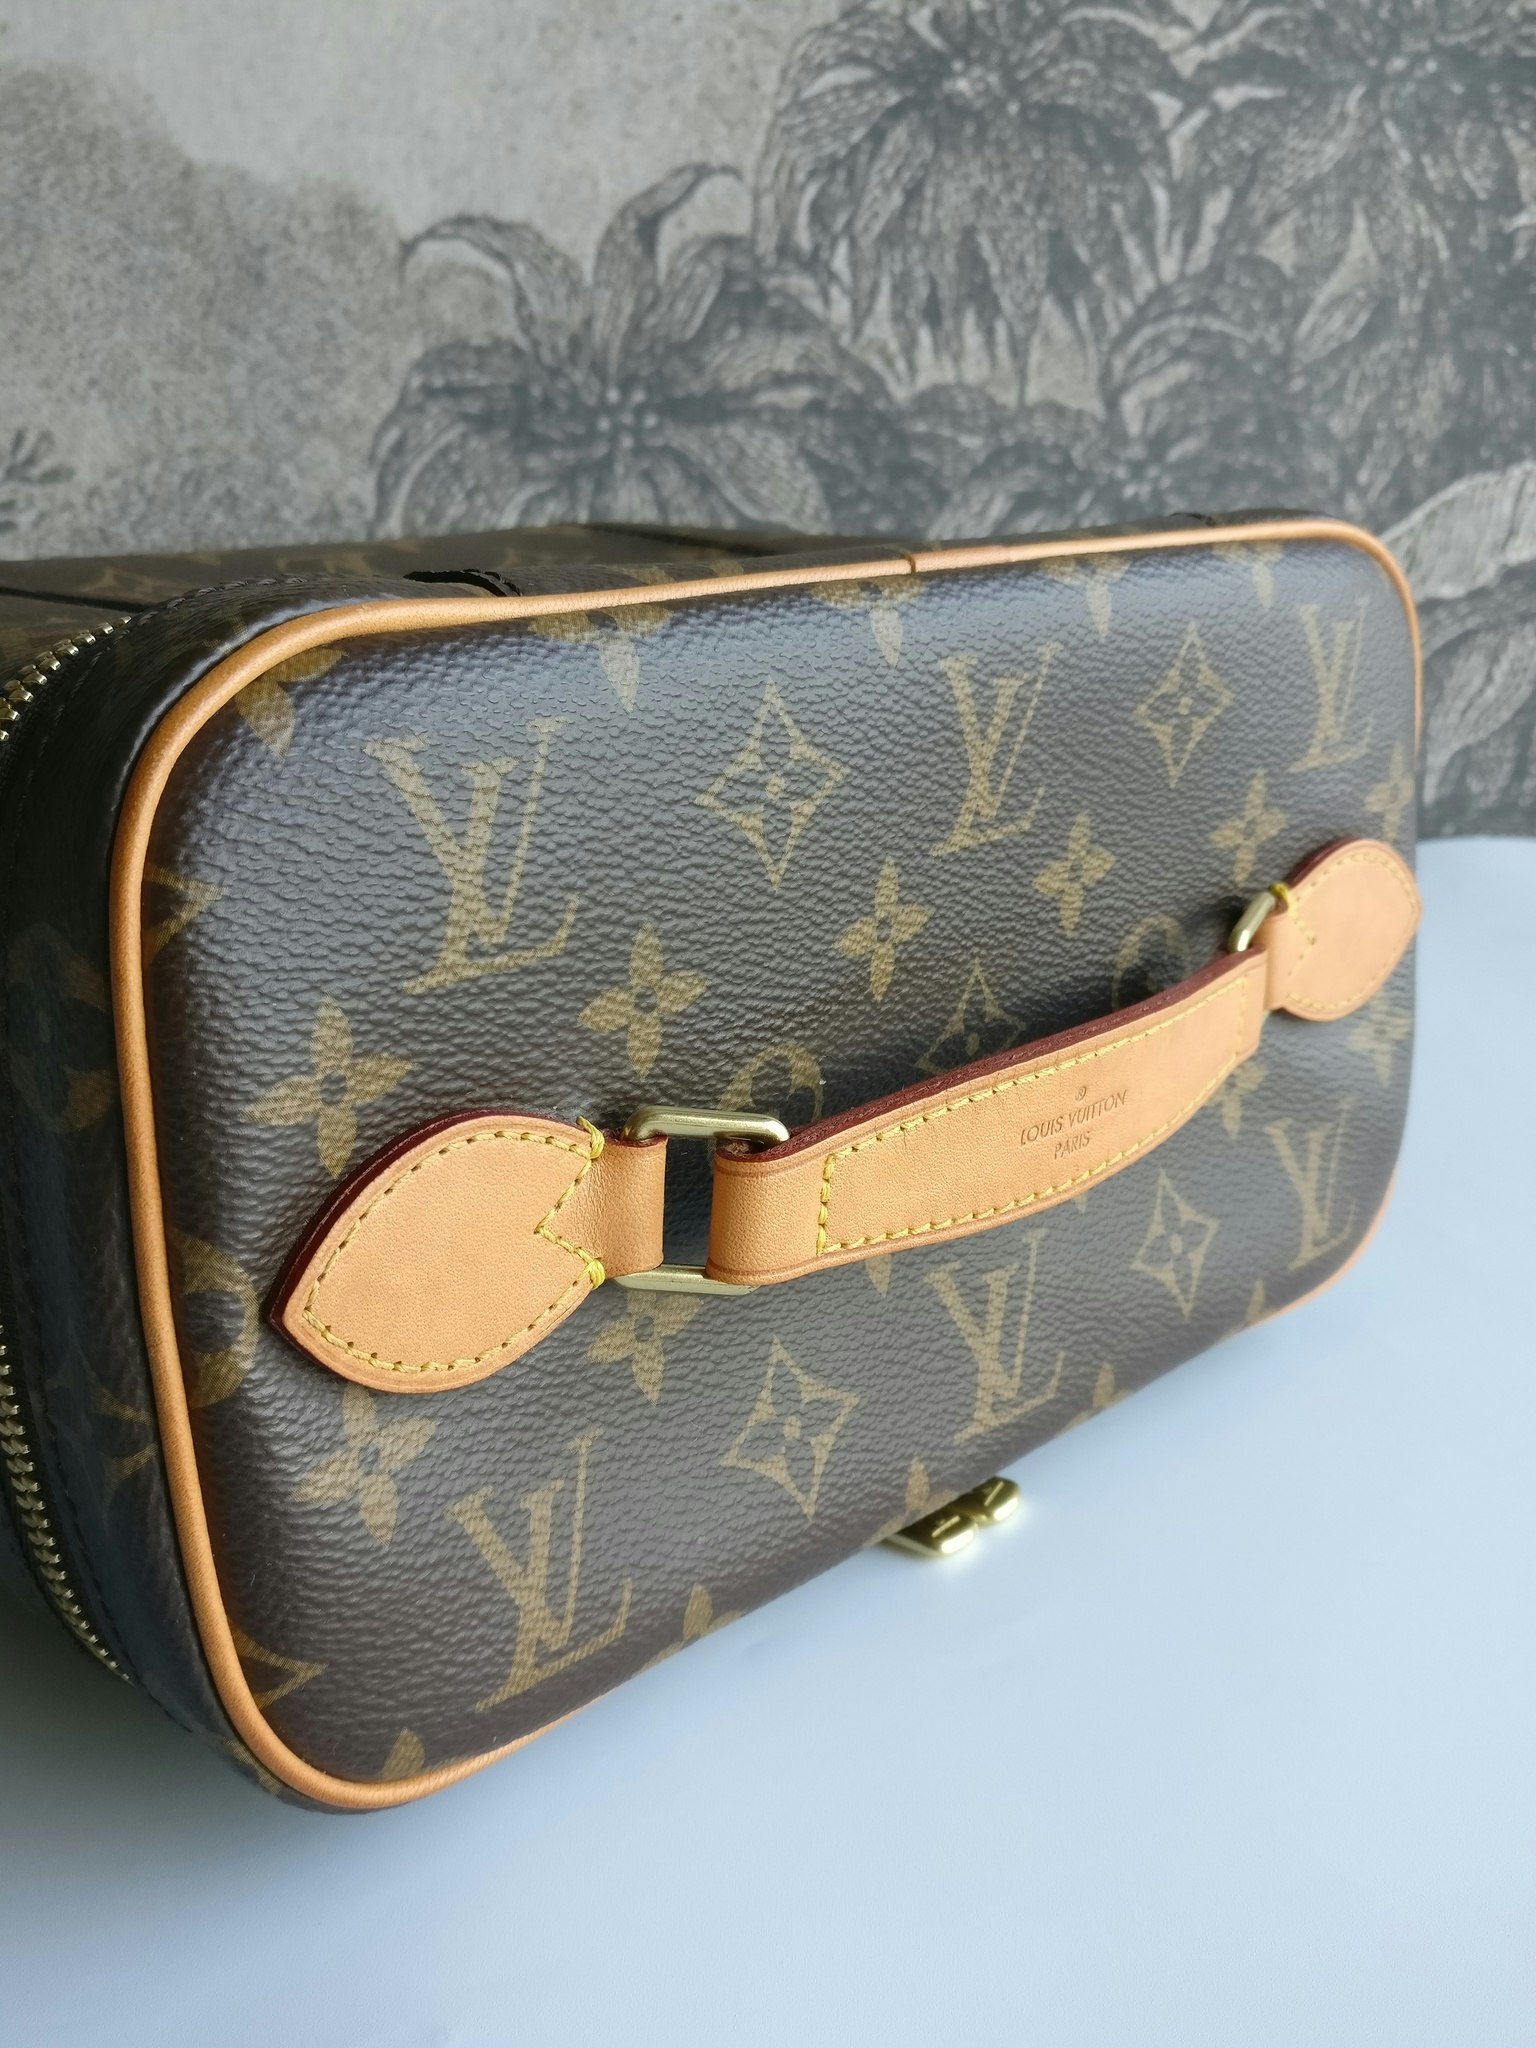 LV Nice BB Toiletry Pouch - Kaialux